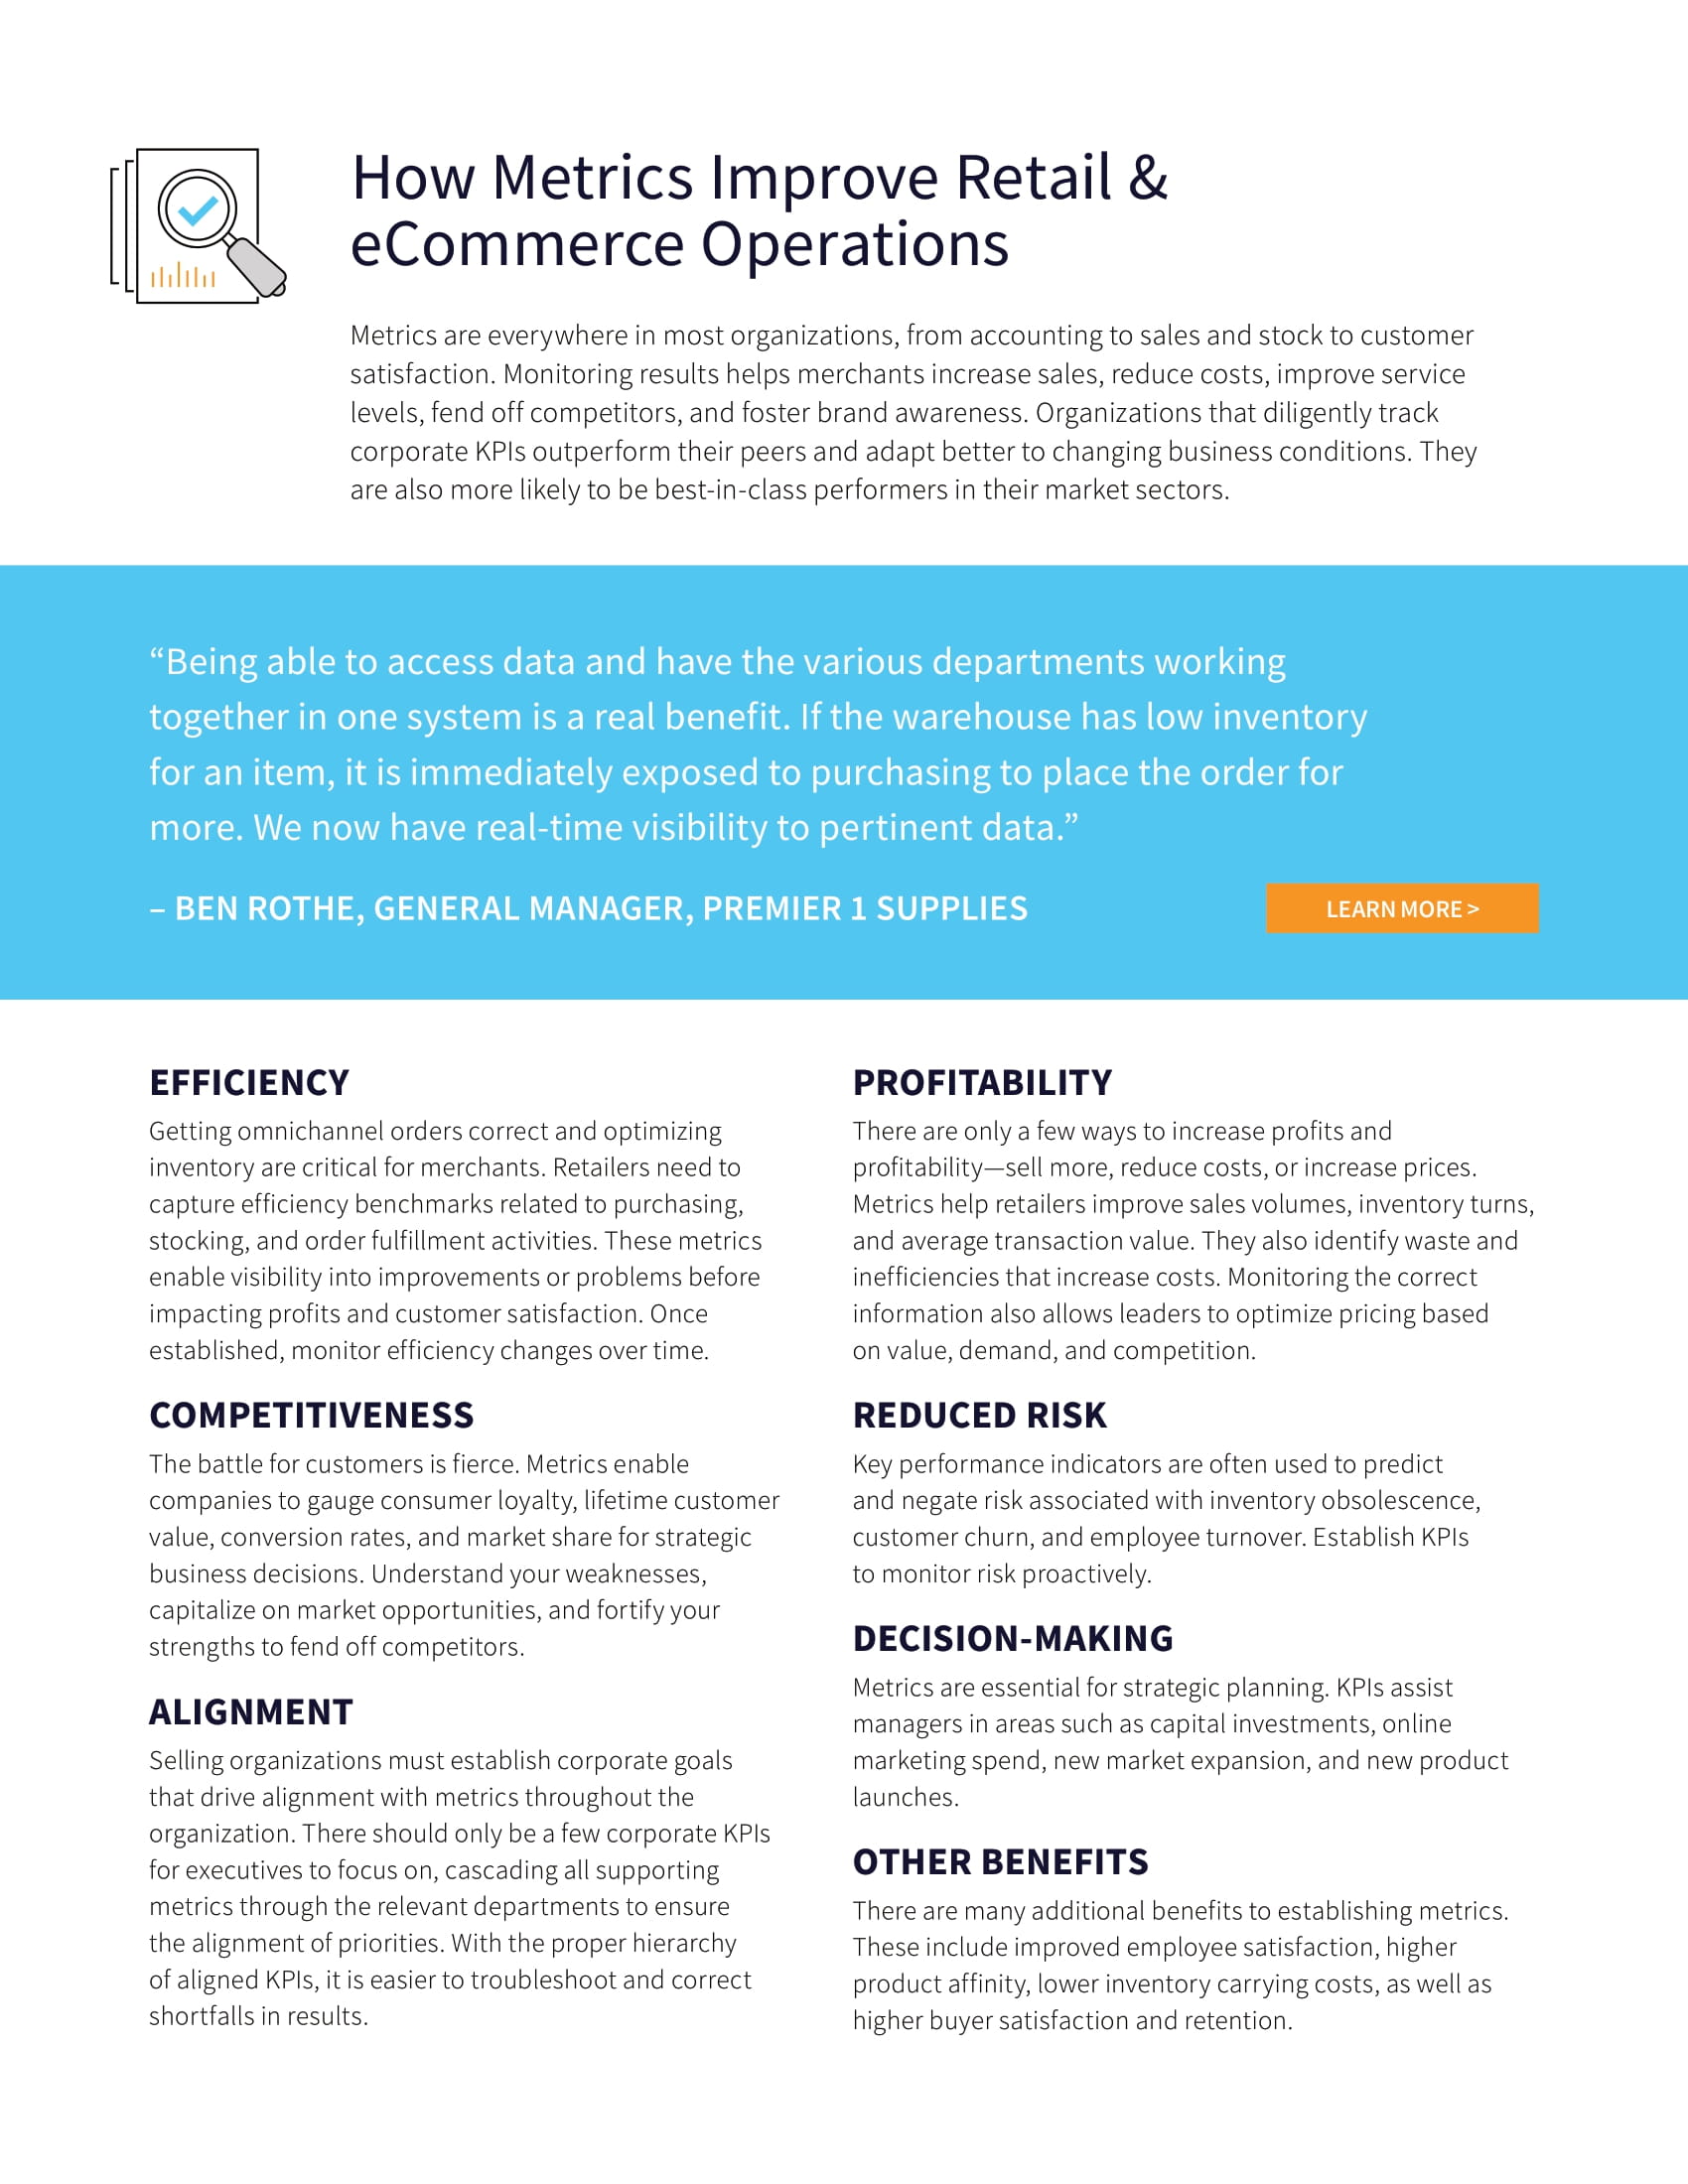 Manage Company Performance Through the Right Retail-Commerce KPIs, page 1